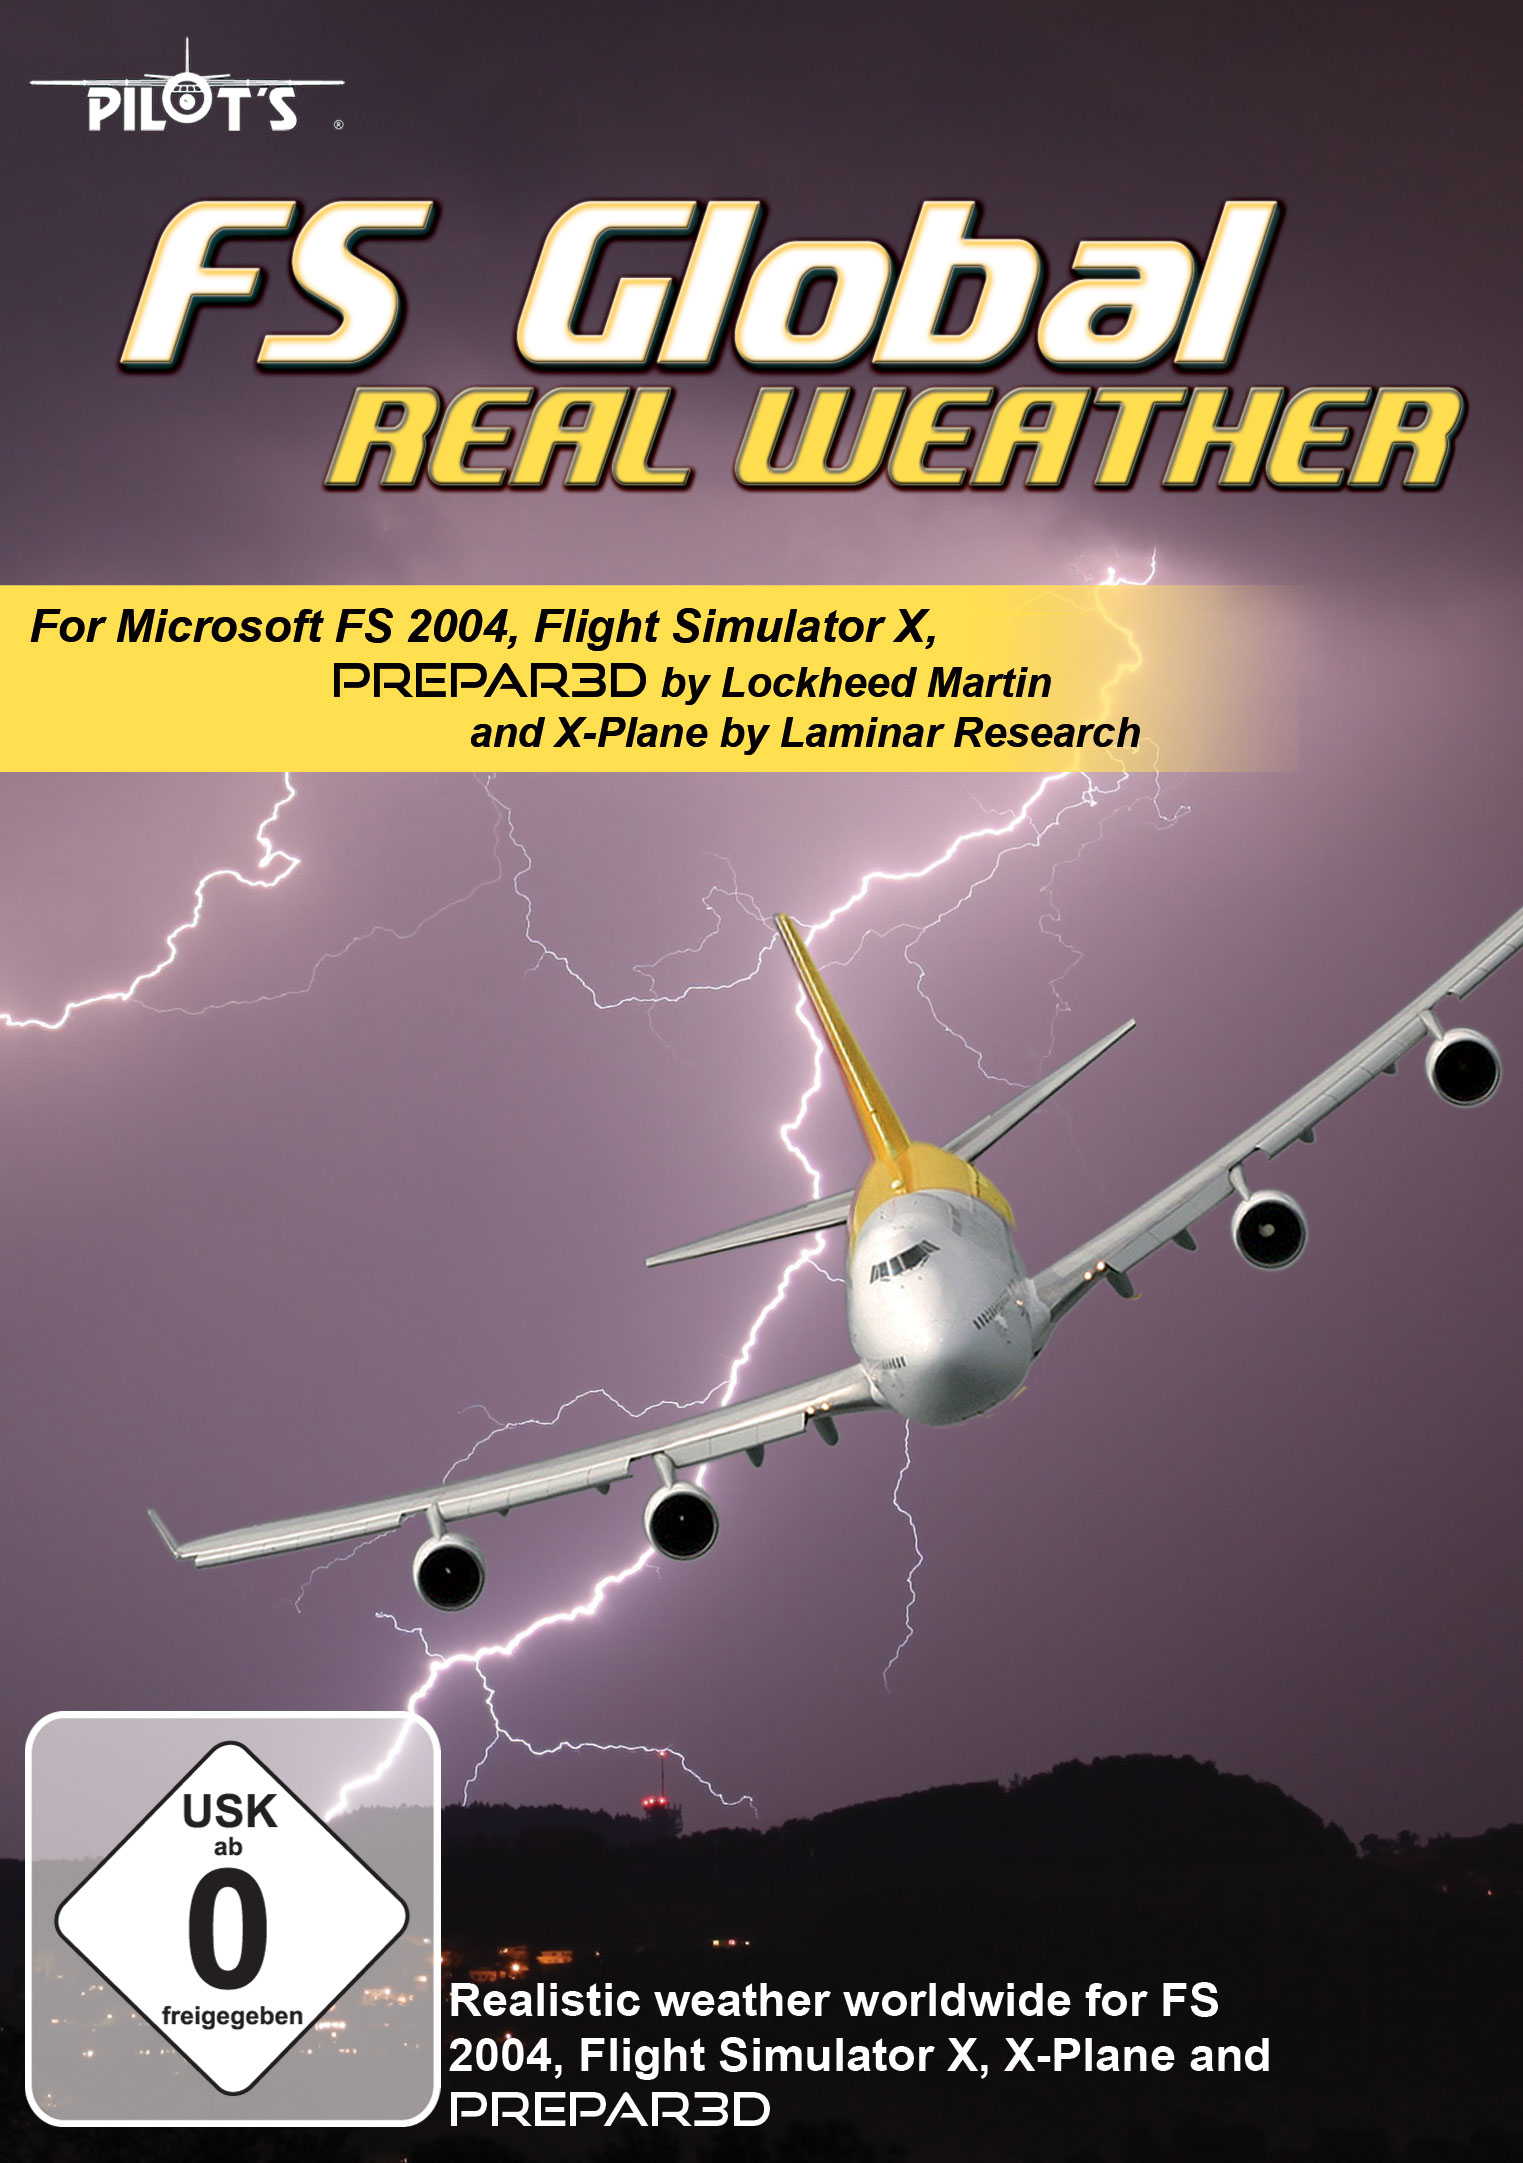 x plane fs global real weather reviews